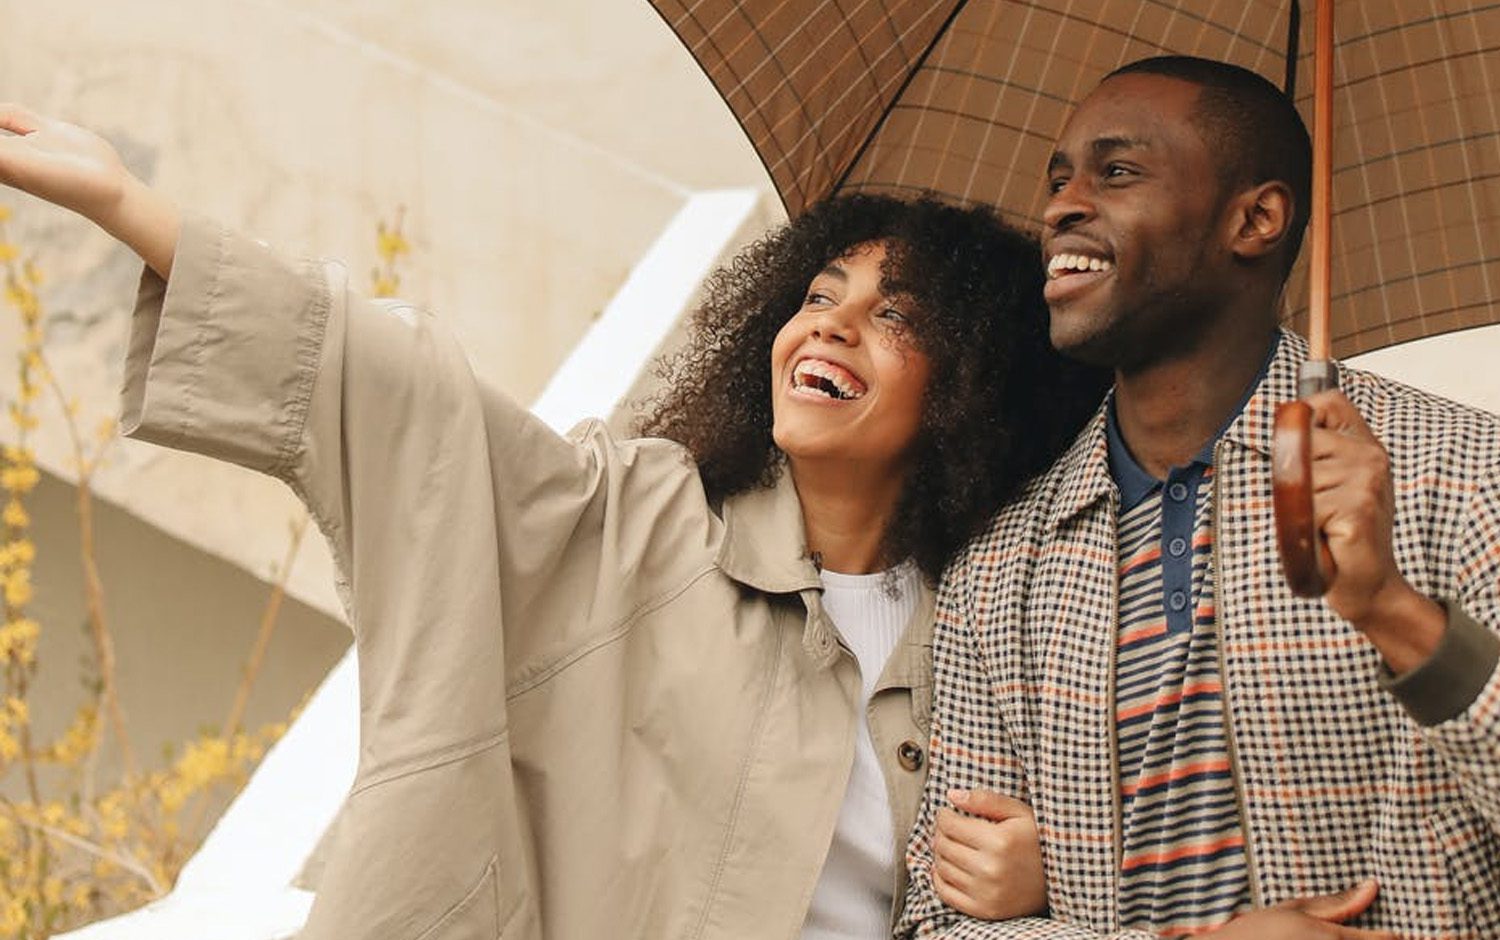 A couple holding an umbrella while smiling.